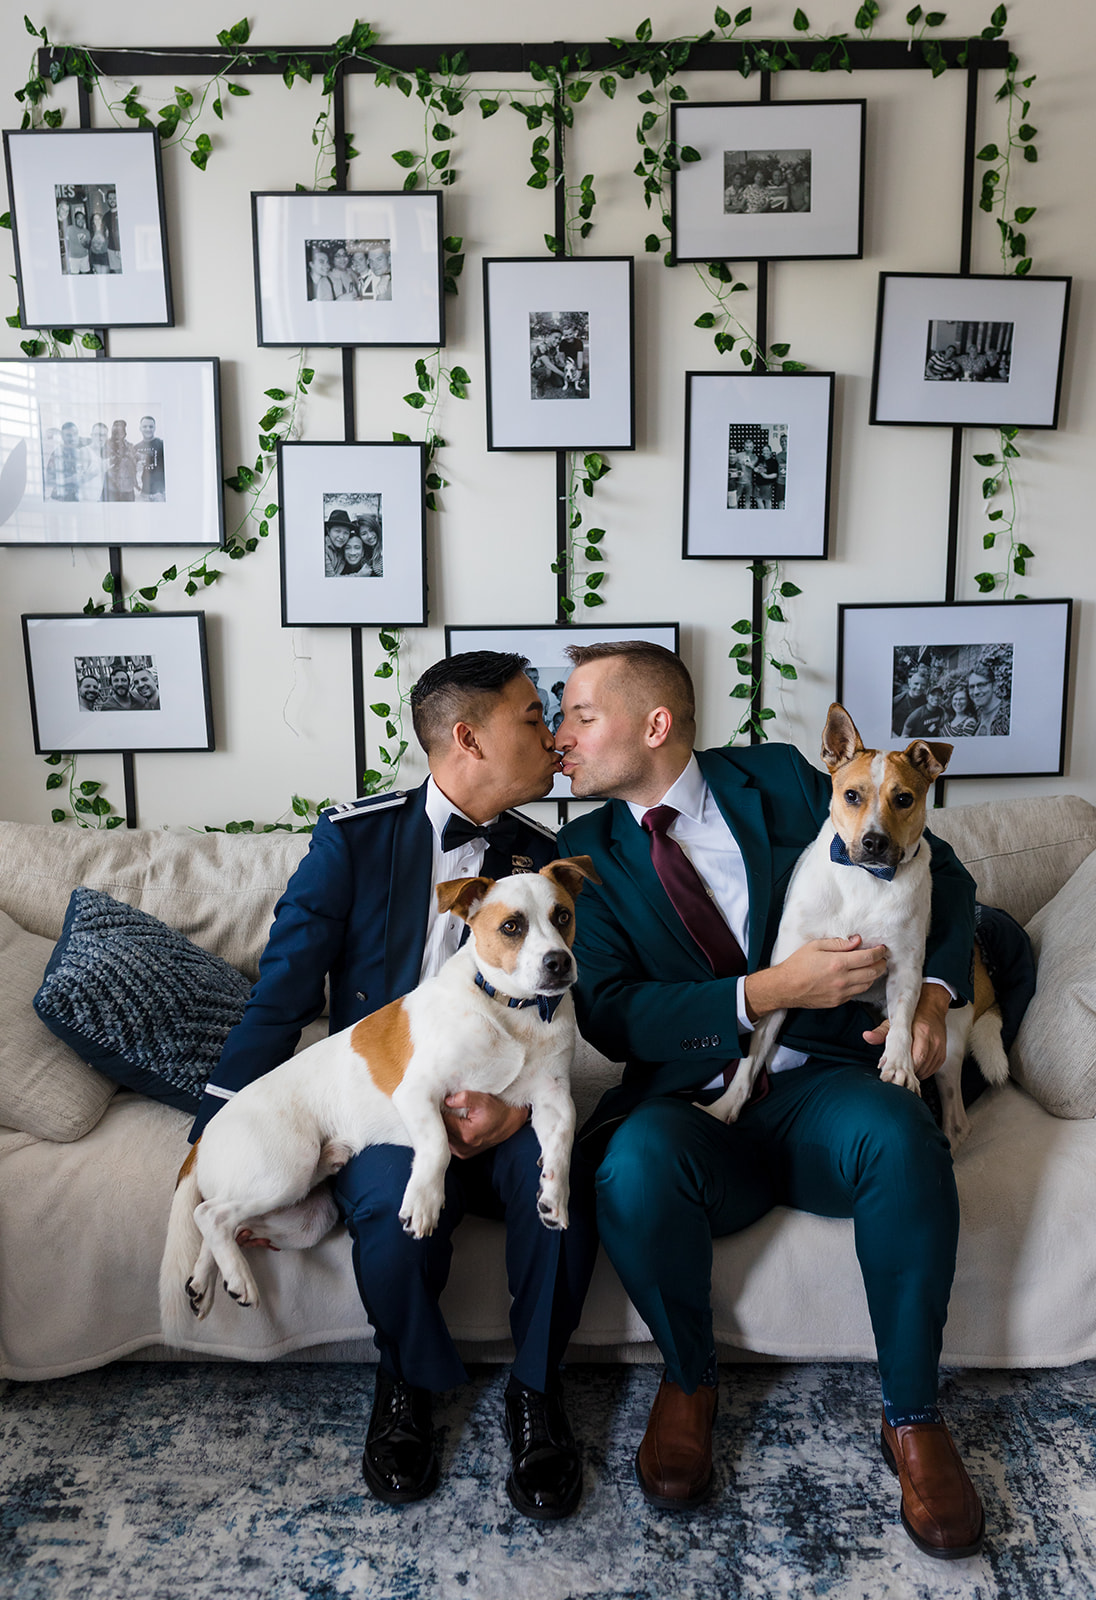 Two grooms give each other a kiss in their living room ahead of their wedding day,..